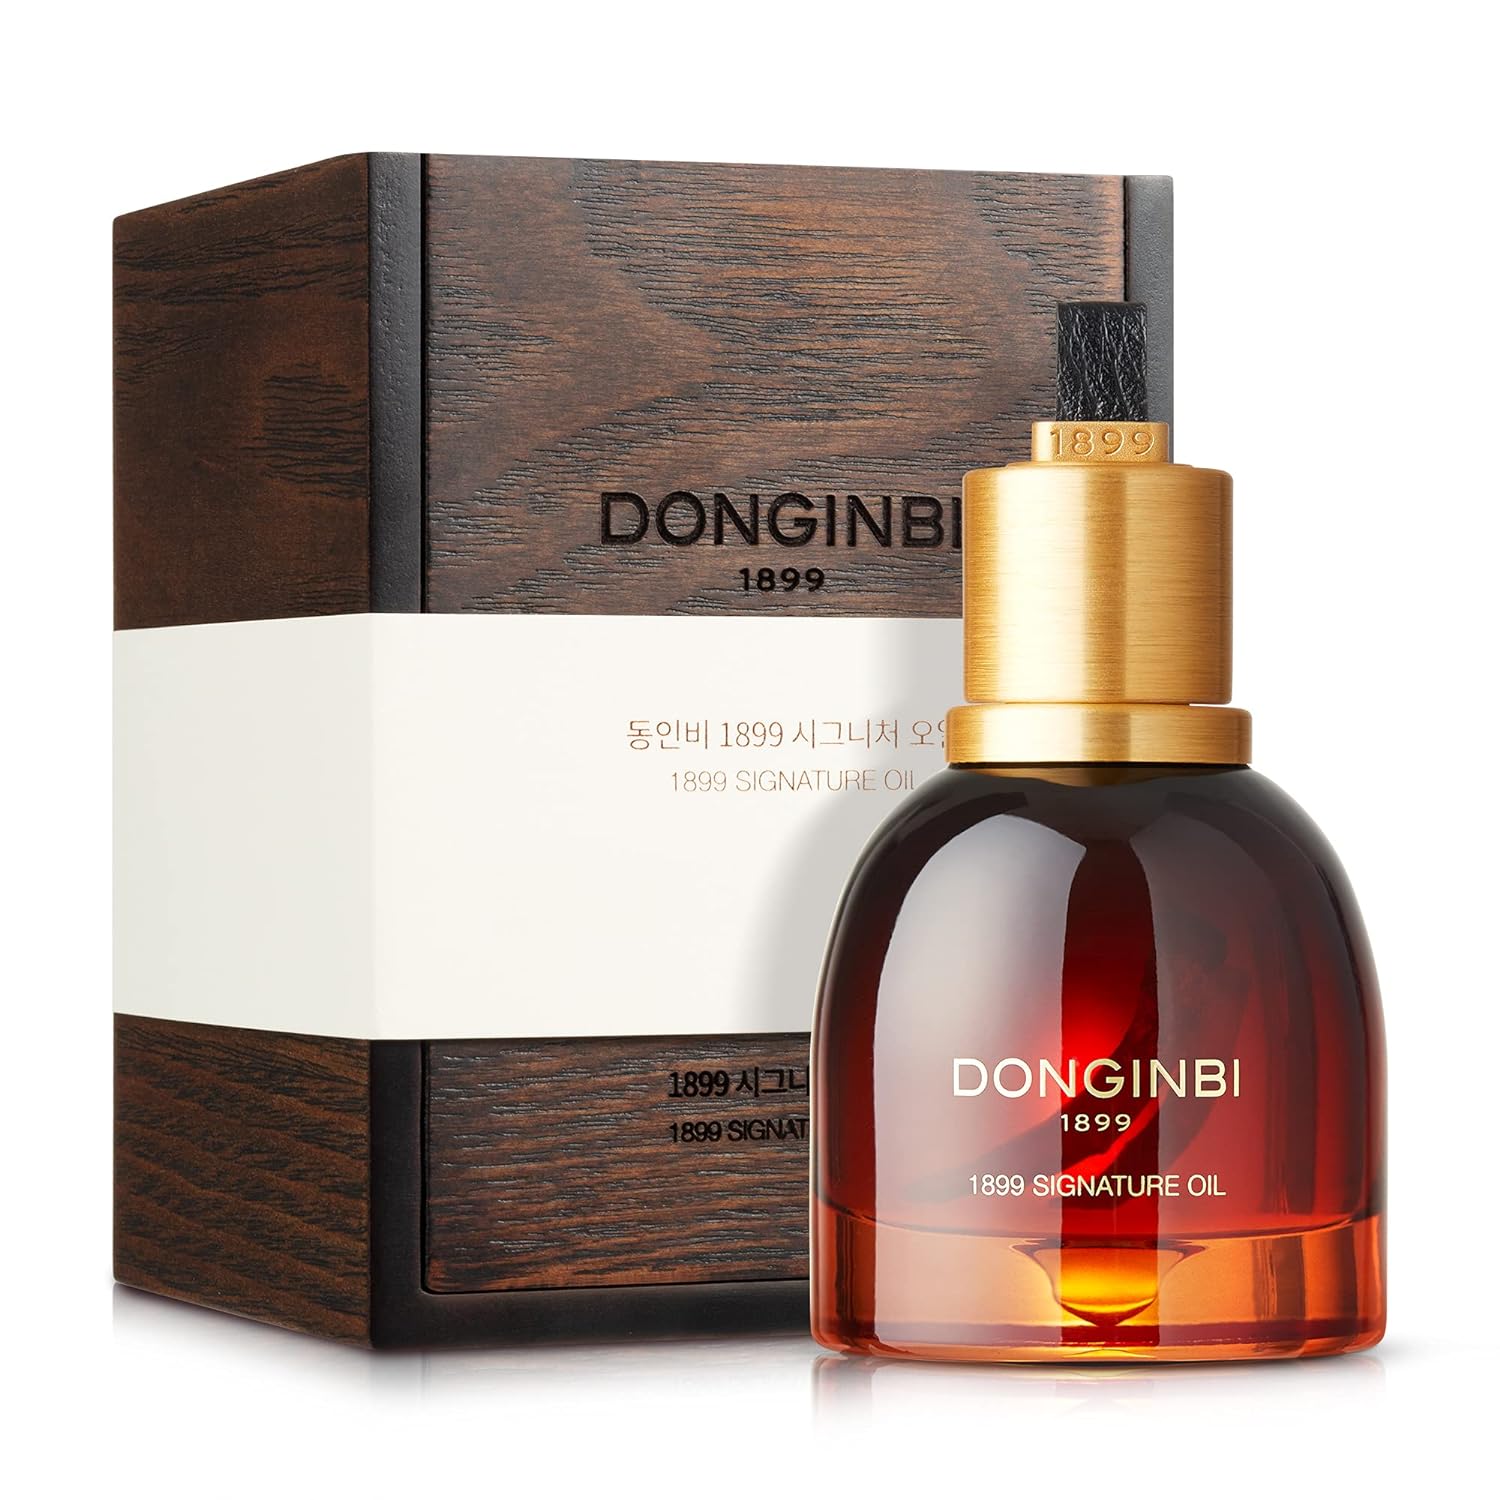 25g bottle of DONGINBI Korean Skin Care 1899 Signature Oil, featuring luxurious gold packaging.